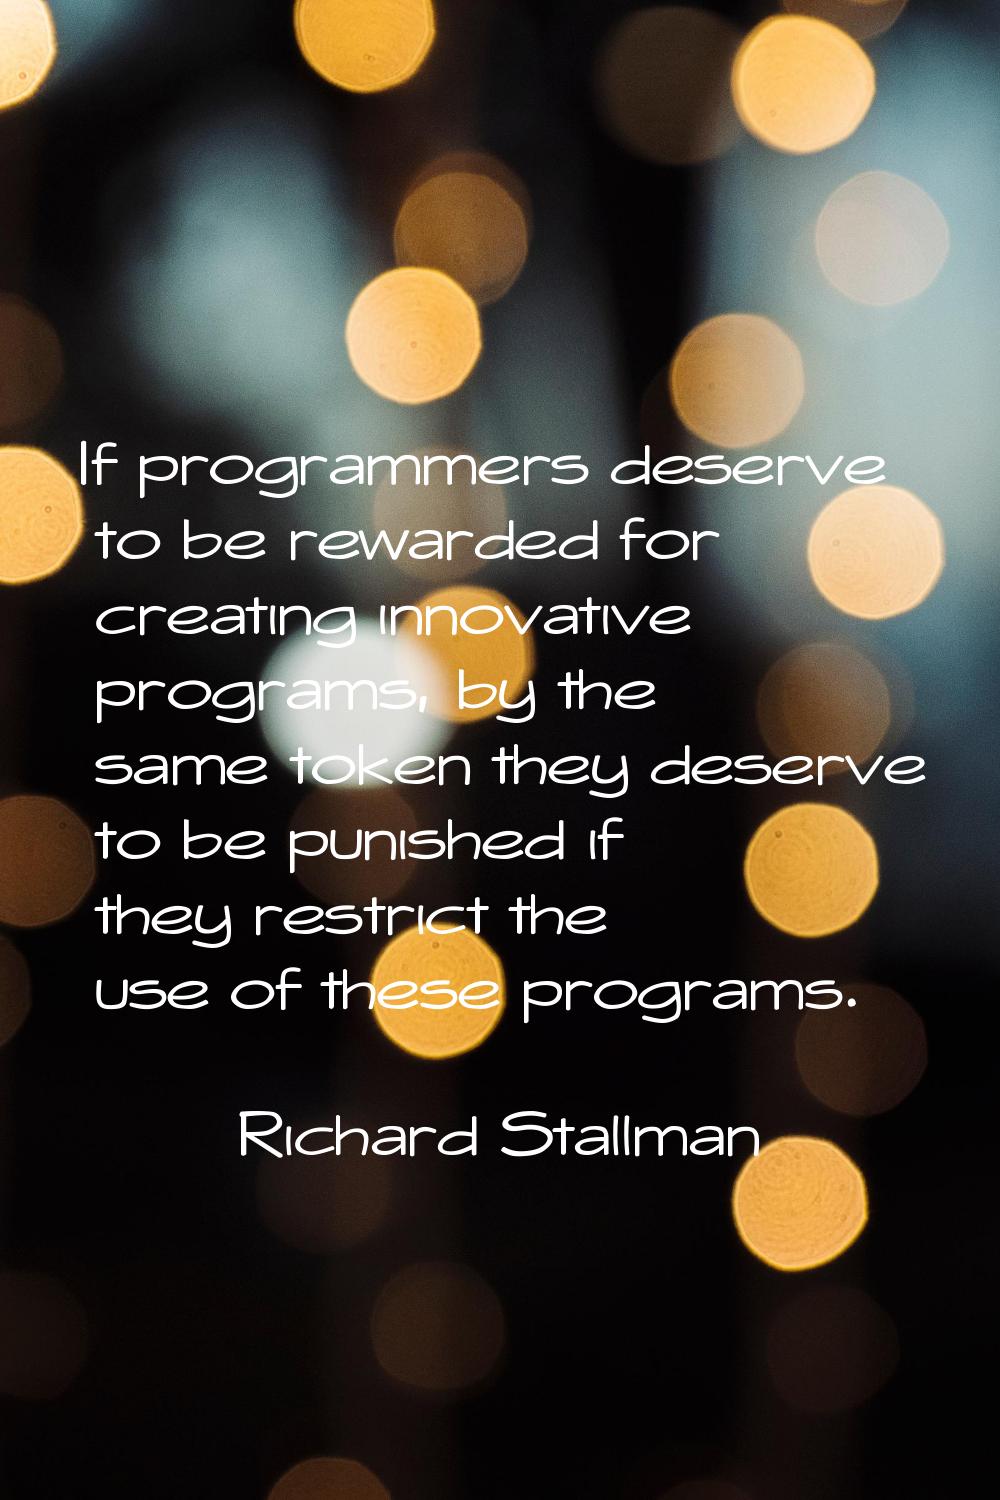 If programmers deserve to be rewarded for creating innovative programs, by the same token they dese